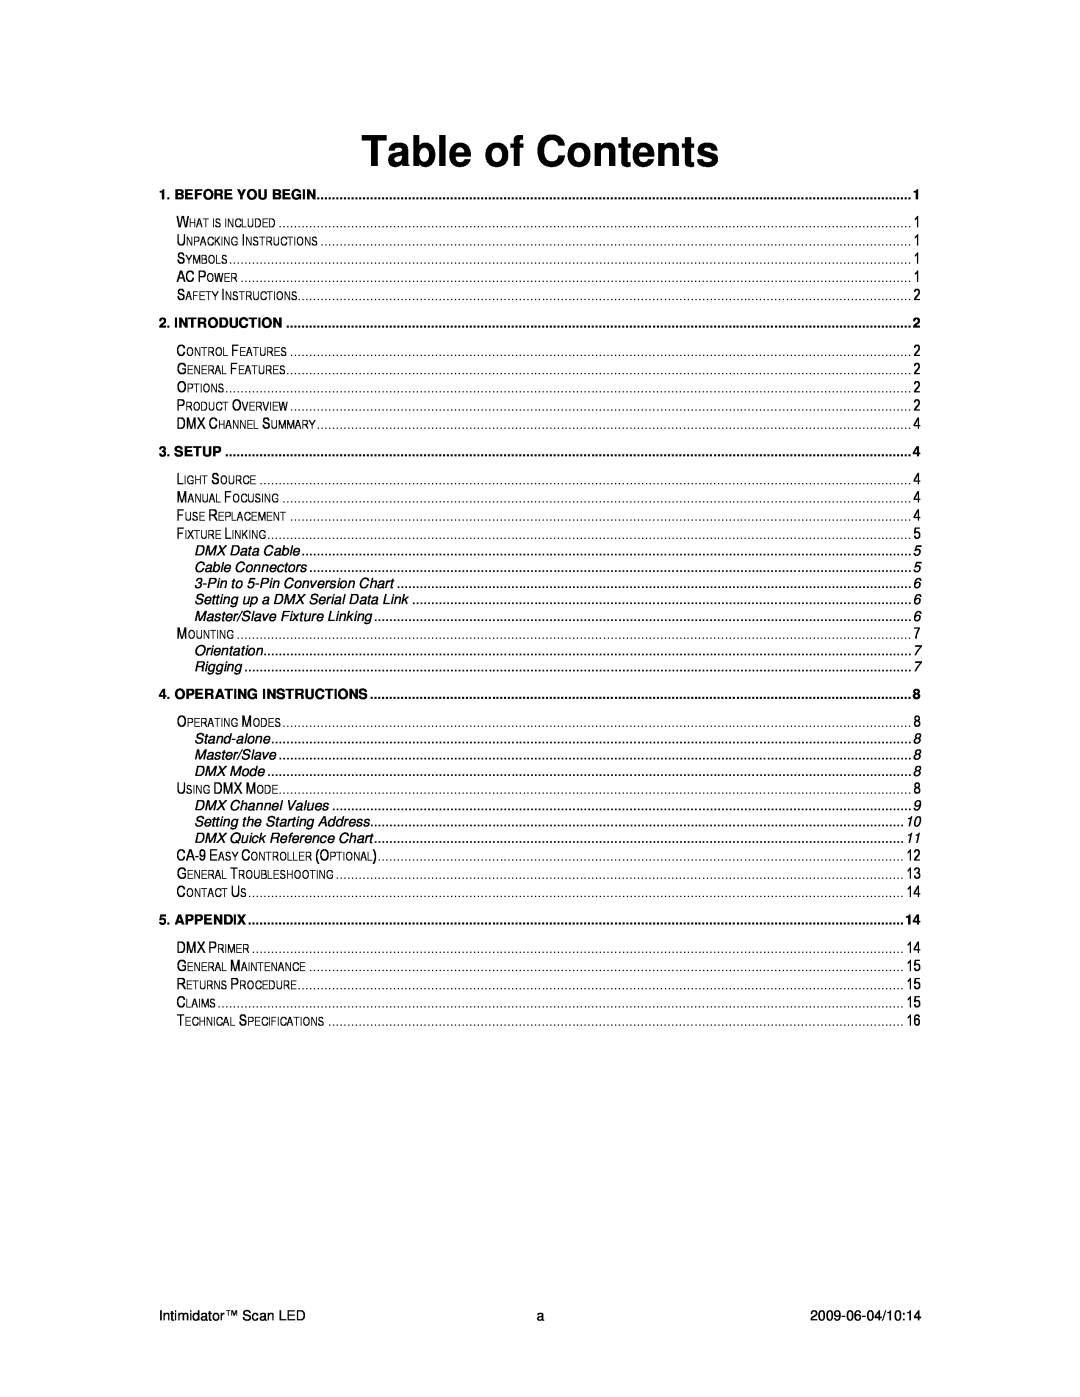 Chauvet a 2009-06-04, 10:14 user manual Table of Contents 